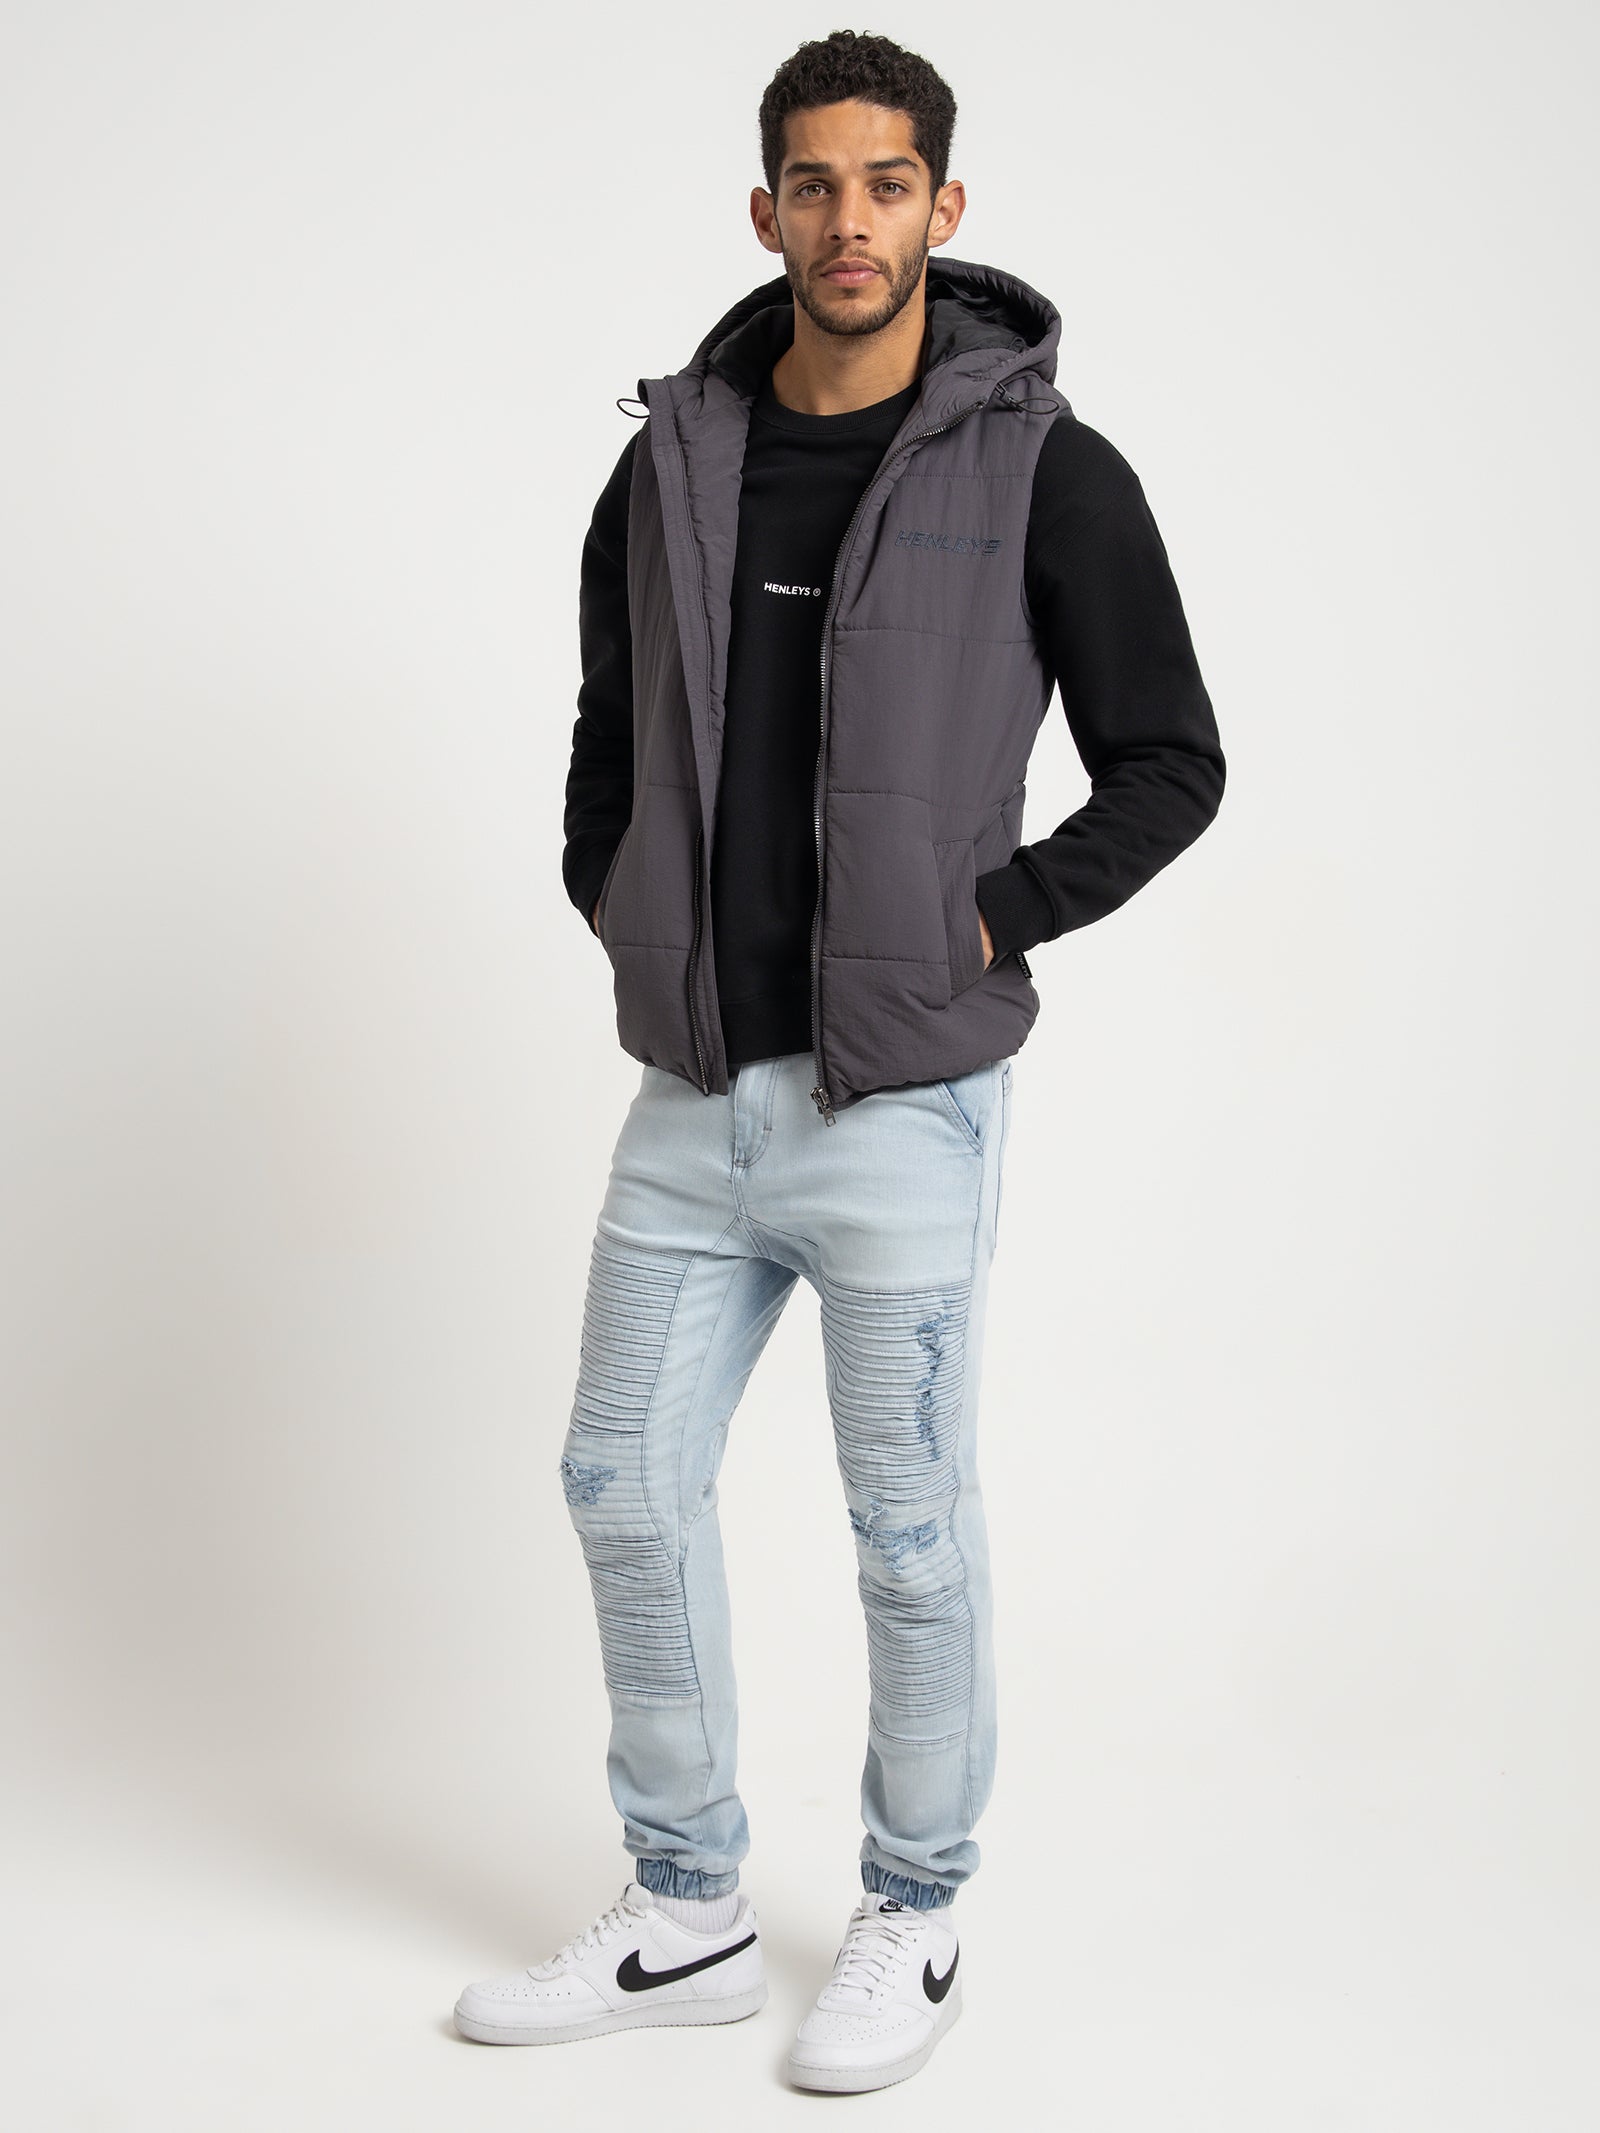 Overdrive Lightweight Gilet in Coal - Glue Store